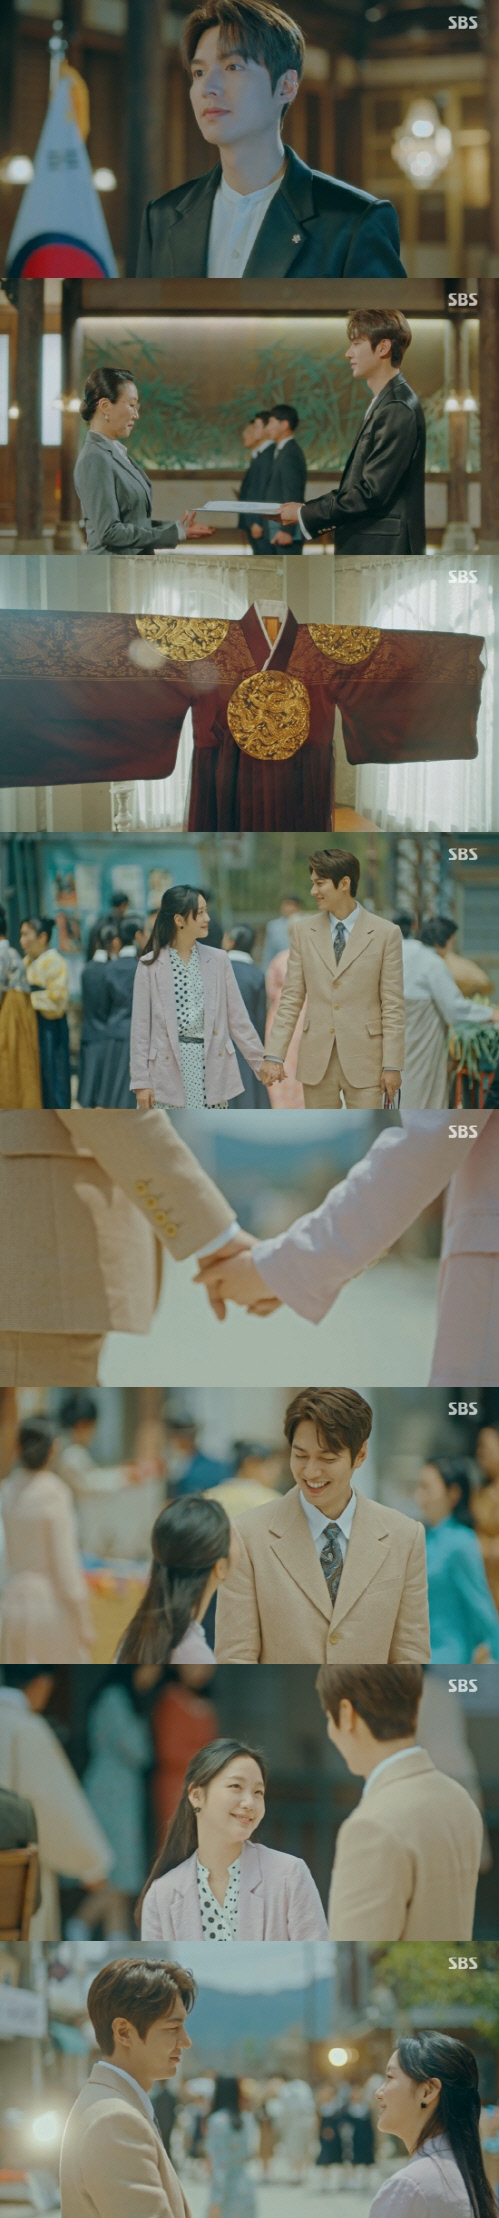 In SBS The King: Lord of Eternity broadcast on the 12th, Lee Min-ho defended Lee Jung-jin and kept all love with Kim Go-eun.On this day, Lee Gon returned to the Korean Empire in 1994 to prevent the inversion of Irim. The inverted enemies arrive at this back gate 20 minutes later.You stop the retreat of Irim here. Cho dissuaded him from thinking, but Igon said, The last name. Then Irim and the young Igon met, and then Irim and Jung Tae-eul face each other in a space between 0 and 1.If Lee Gon returns the world, Lee s memory disappears from Jung Tae - eun, but Jung Tae - eun said, My heart is sick, but My brilliant memory remains in my mind.Then the ink in Jung Tae-euls hand disappeared and he was embarrassed, but then Igon and Cho Young appeared together.Then Irim noticed the existence of Igon and punished Irim with the words decapitating the reverse Irim.The reverse has disappeared, but I can not meet Lee and Jung Tae.Jung Tae-eul returned to his current point and waited for Lee Gon. Jung Tae-euls longing for Lee Gon grew even bigger while he was living his daily life in South Korea on April 25, 2020.Then Jung Tae-eul waited in the past, thinking that Igon said, If the door closes, open the door of the whole universe, so I will go to see you.Lee and Jeong enjoyed dating in many parallel Worlds every weekend, and in 1994 they were able to grow up without accidents because they encountered a young Kang Shin-jae in South Korea.Since then, Igon and Jung Tae have kept each other and raised love.Photos  SBS